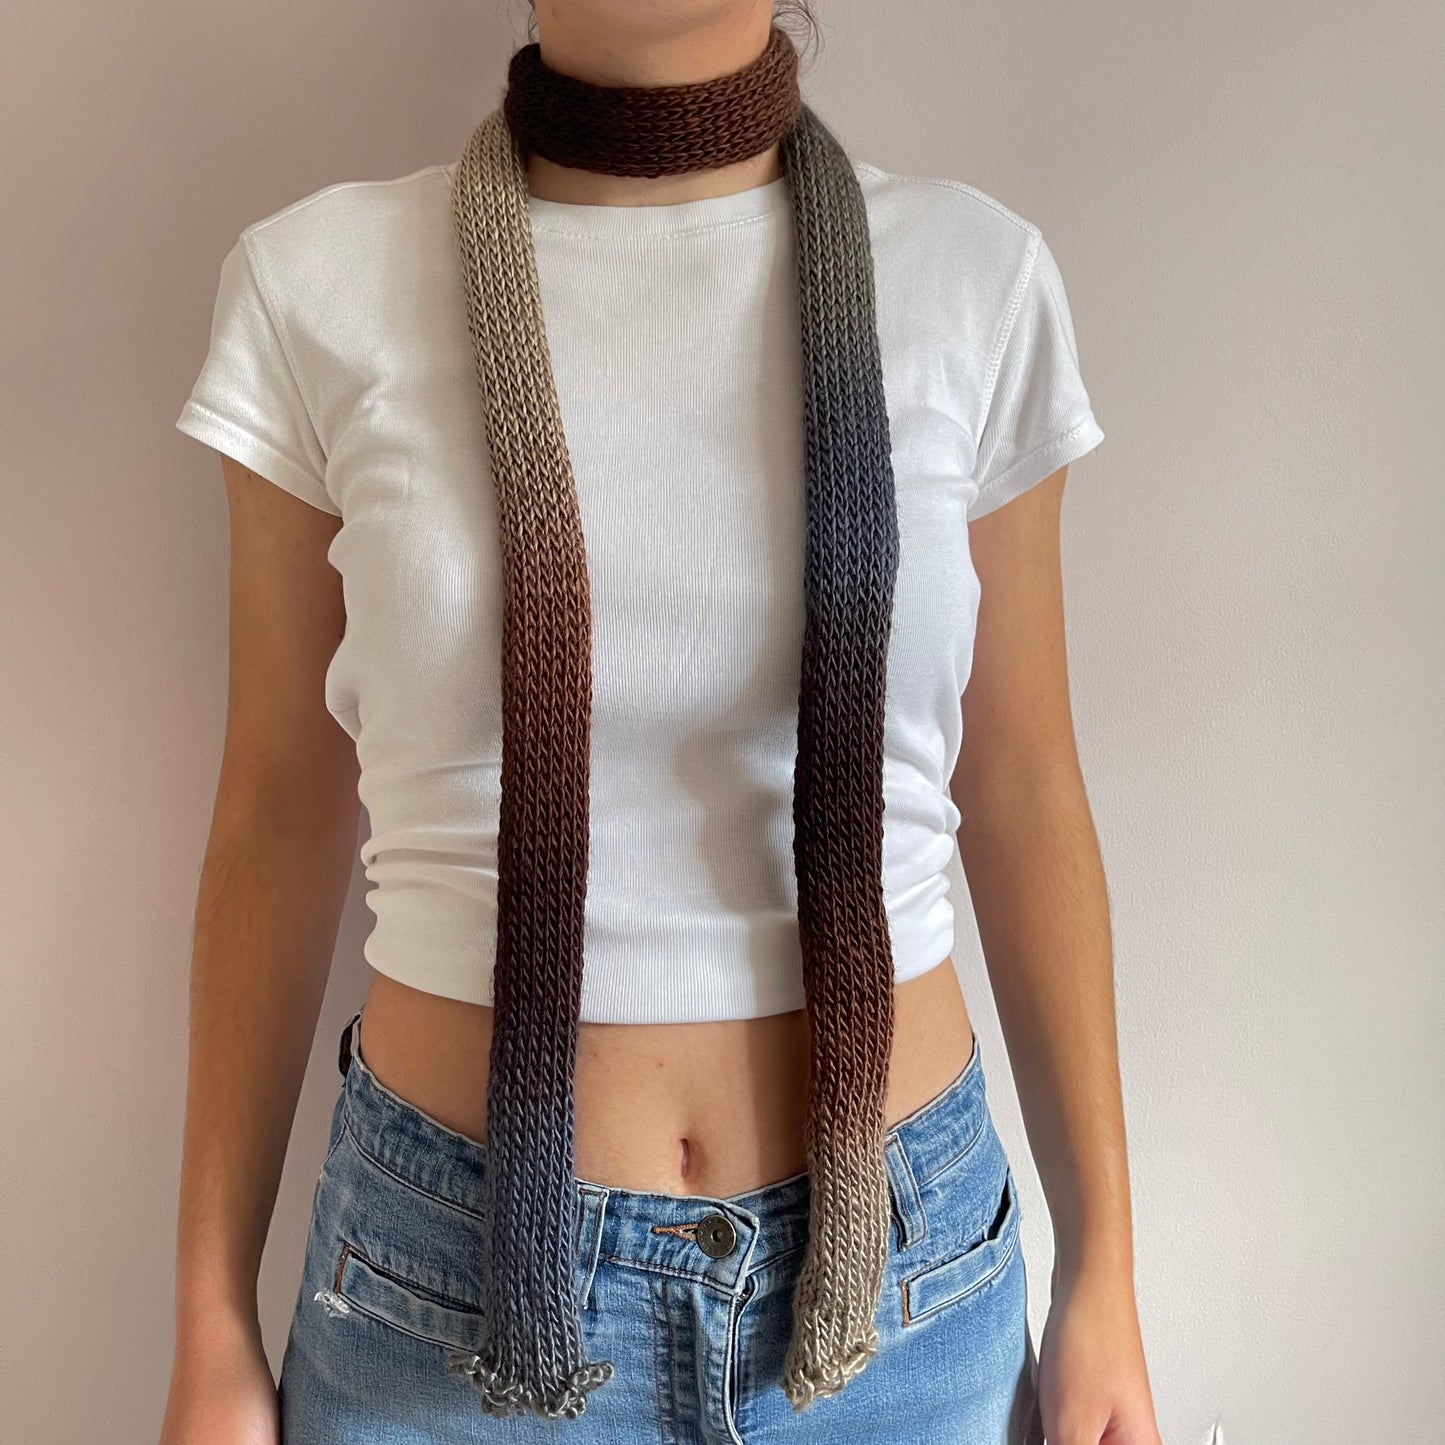 Handmade knitted ombré skinny scarf - Seashell colourway